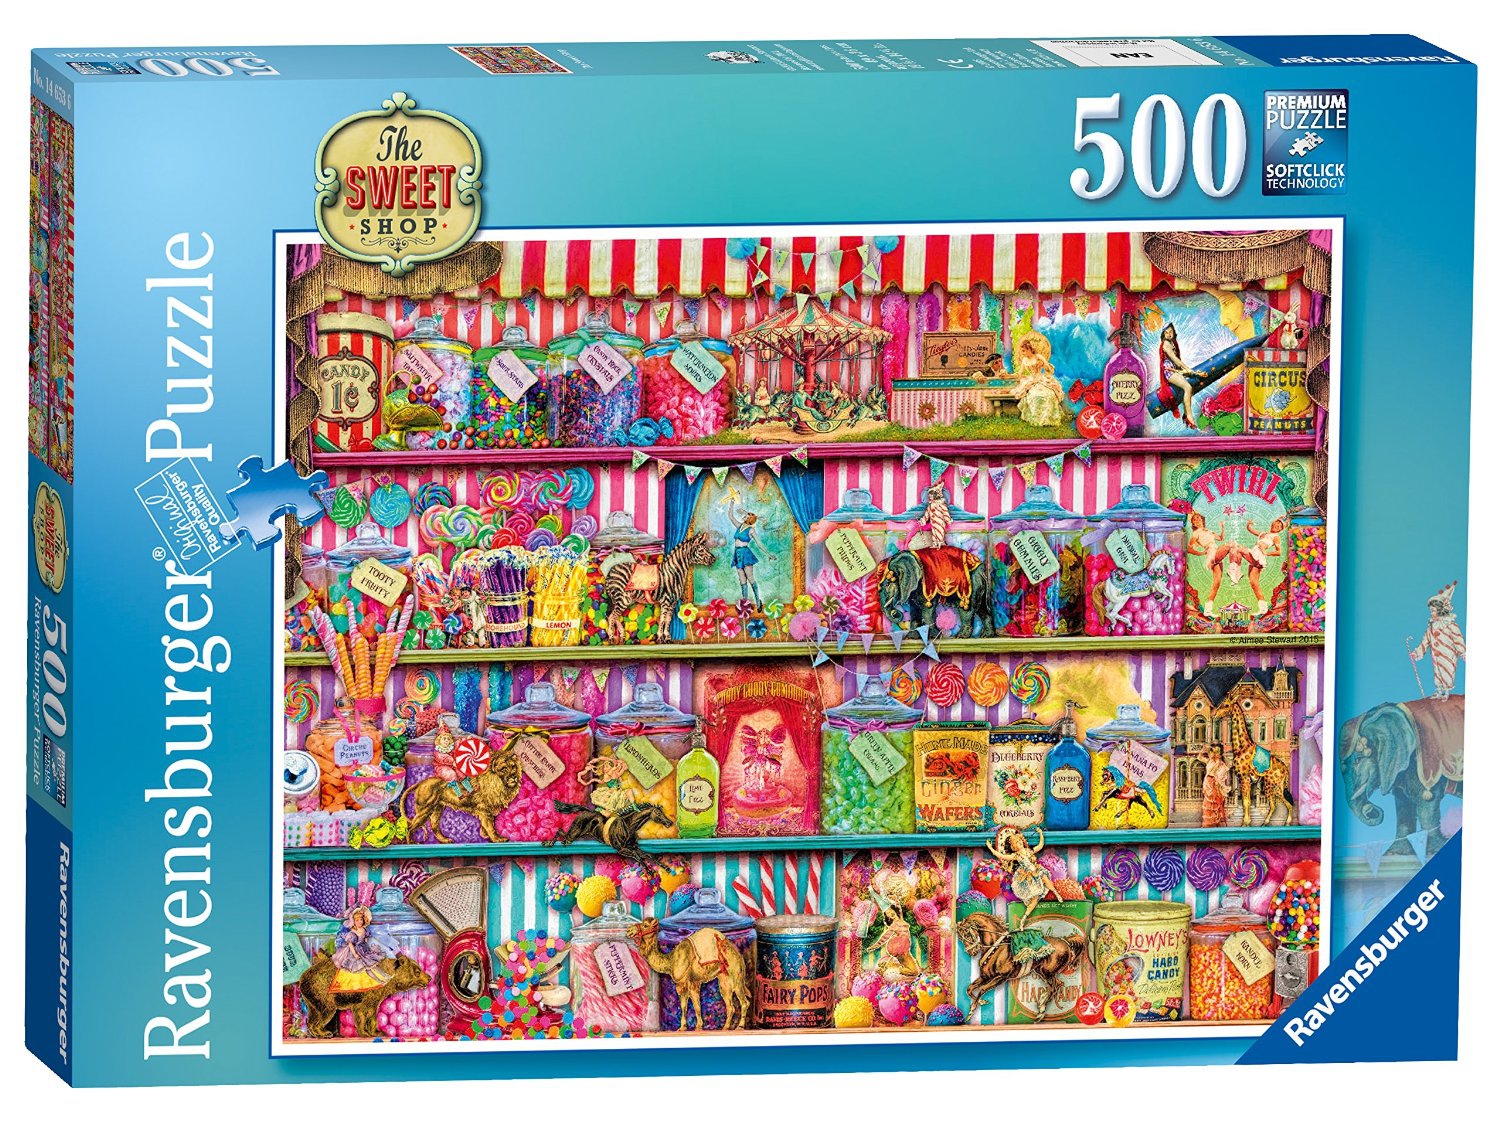 Ravensburger 'The Sweet Shop' 500 Piece Jigsaw Puzzle Game